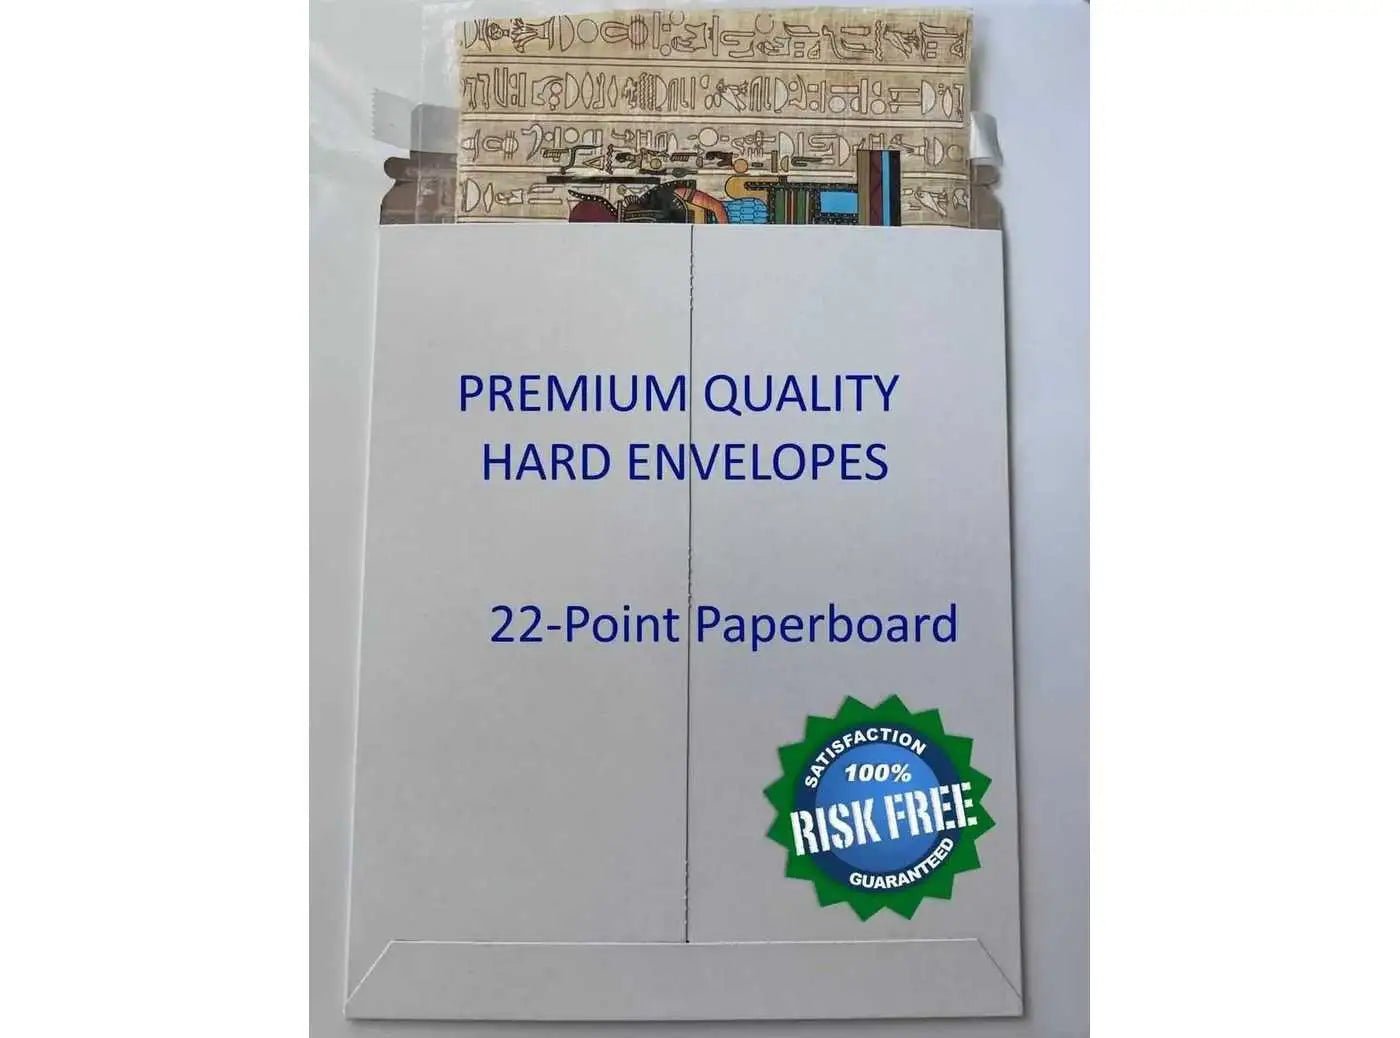 Merry Christmas on Egyptian Papyrus Paper - Merry Christmas Gift Card Printing Authentic Papyrus